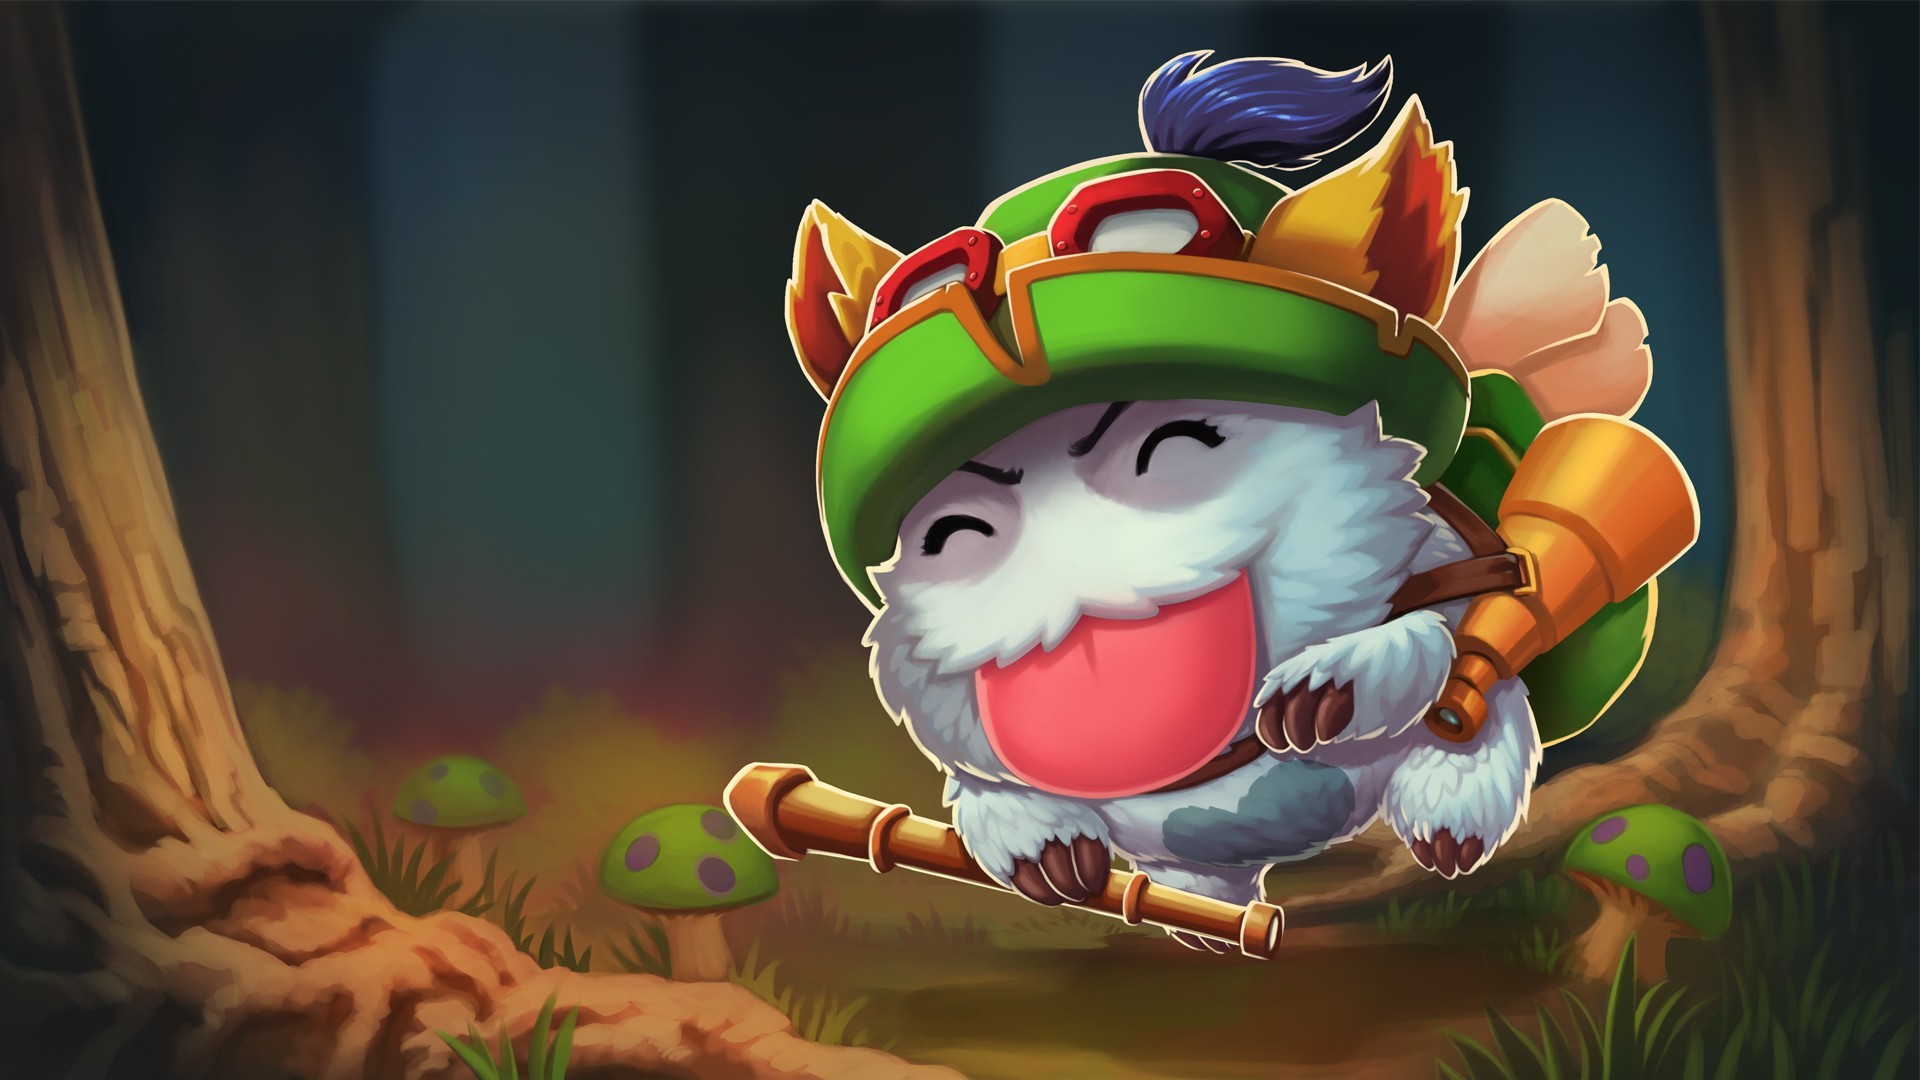 League Of Legends, Poro, Teemo Wallpapers Hd / Desktop - Poro League Of Legends Teemo , HD Wallpaper & Backgrounds